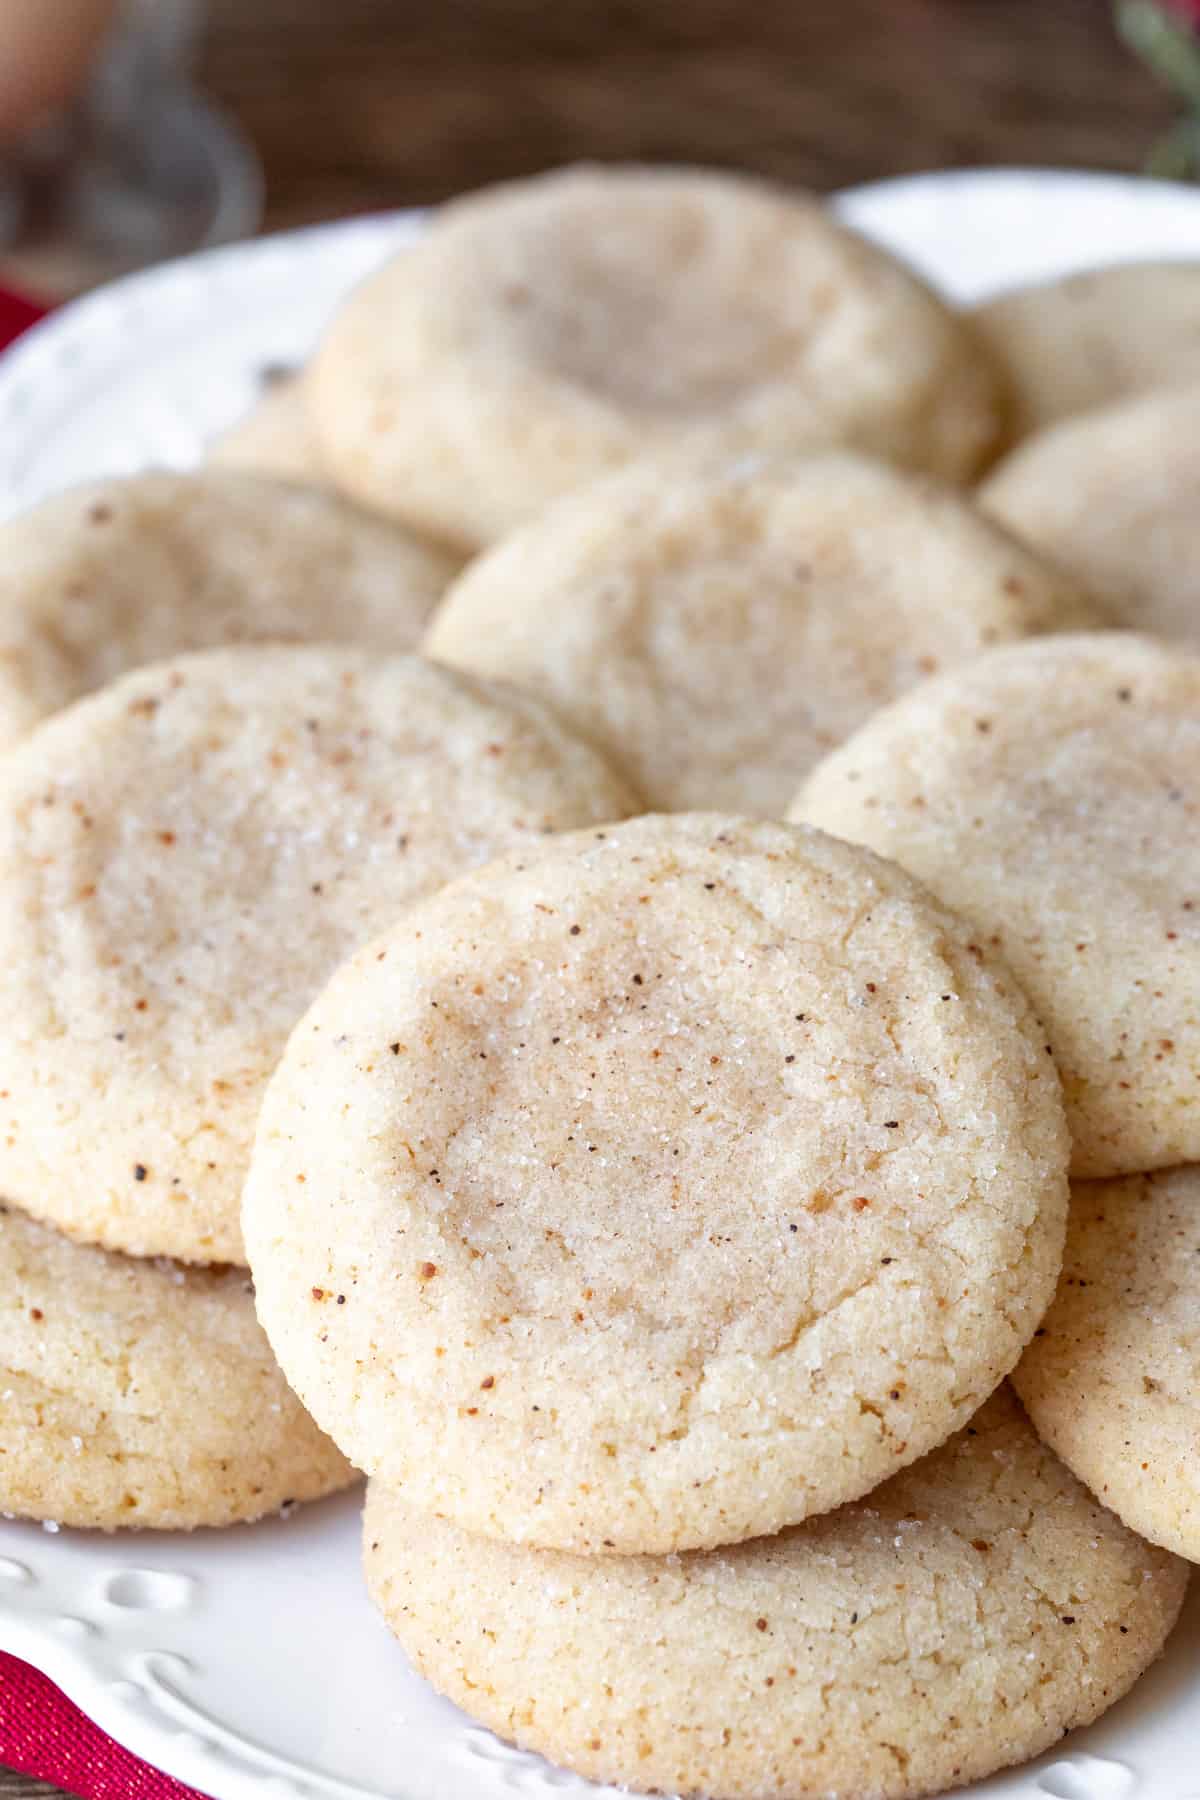 Plate of chewy eggnog snickerdoodles